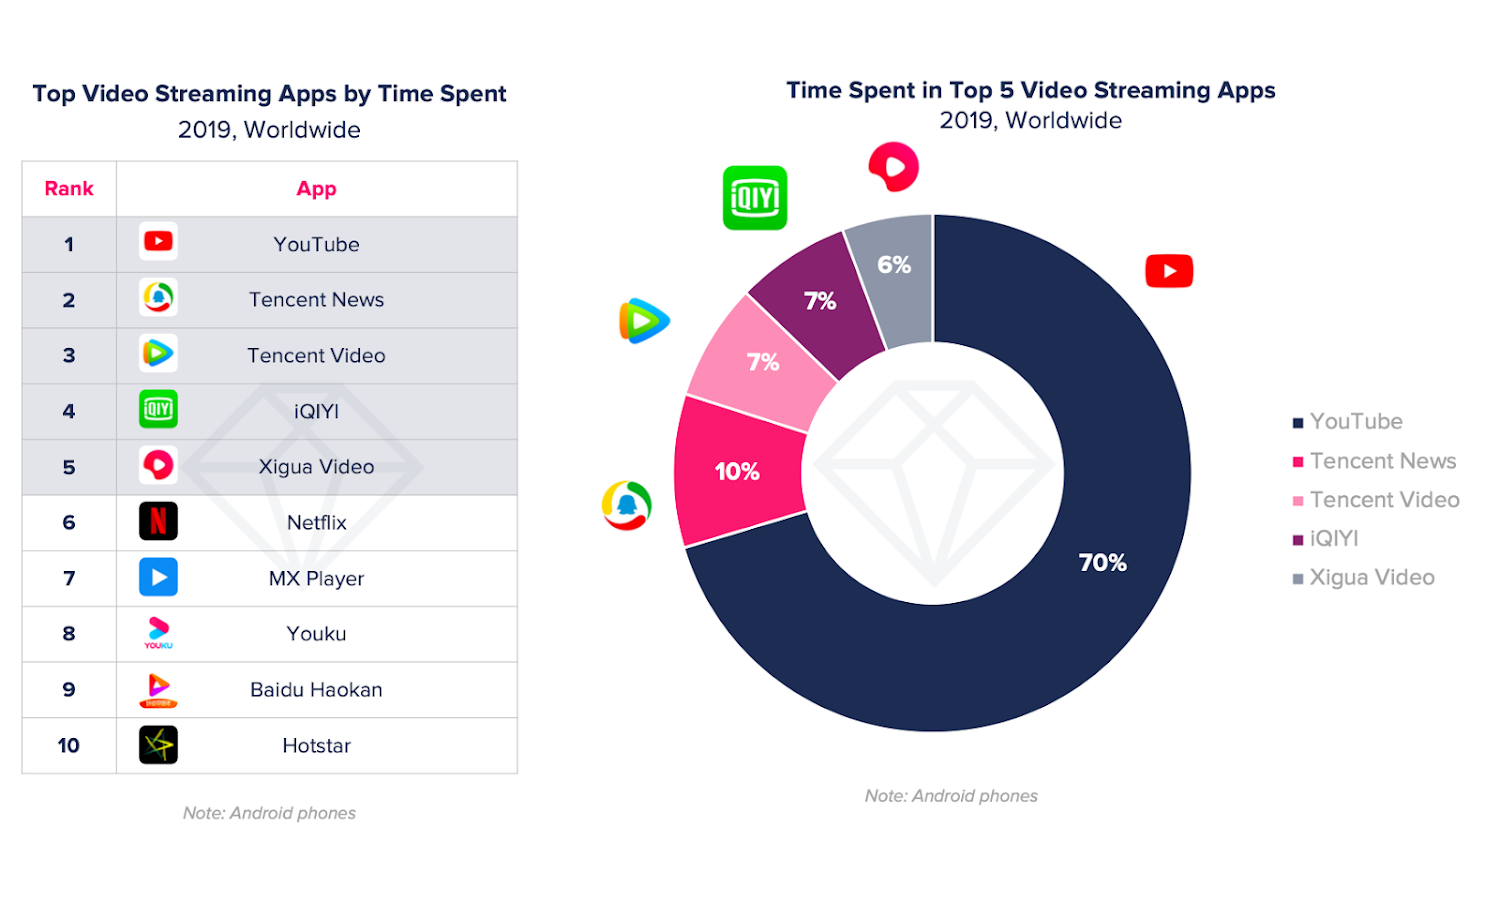 Ad revenue and time spent prove YouTube’s continued domination in mobile streaming